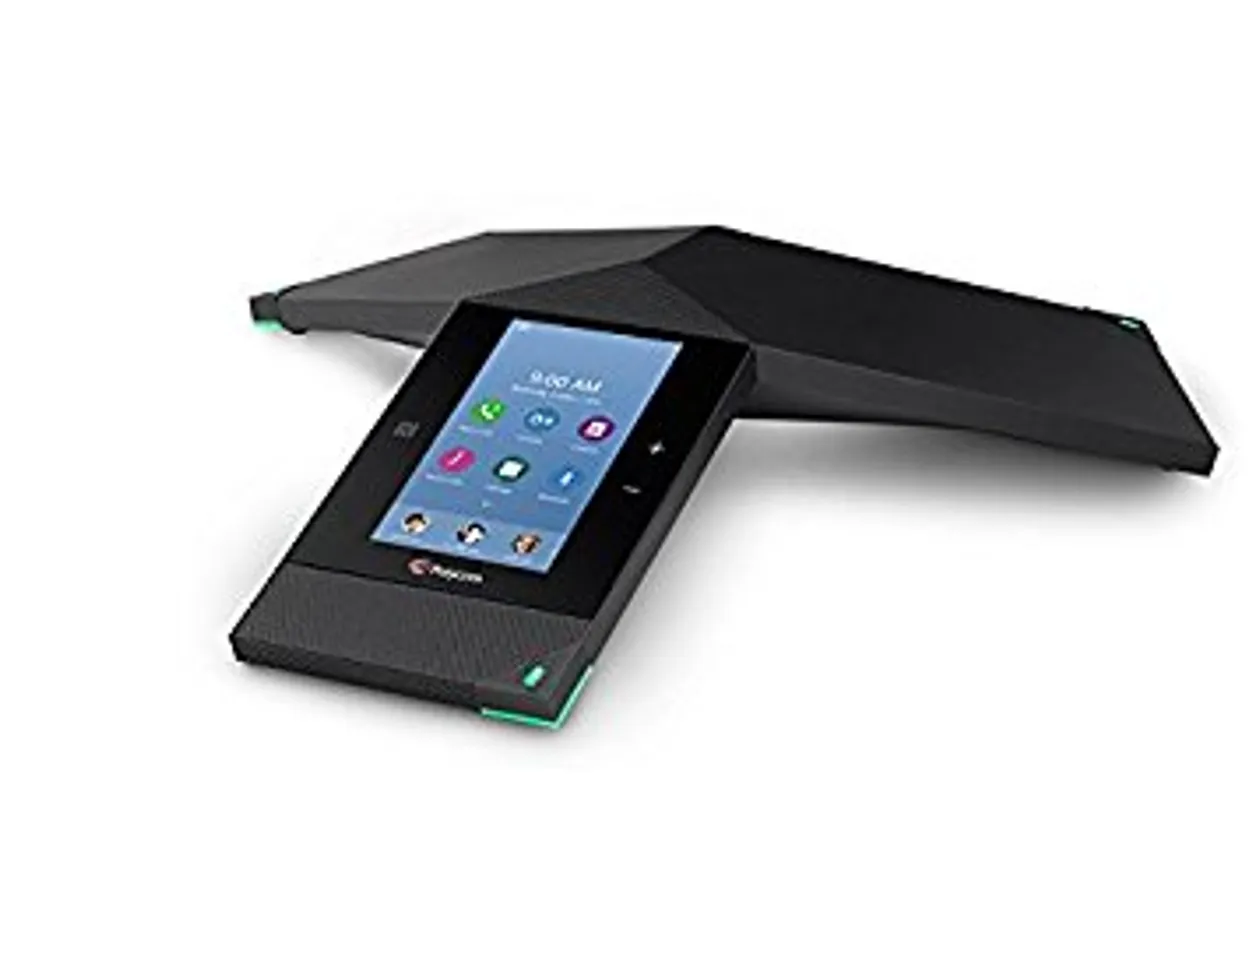 Polycom’s Fastest-Selling Conference Phone Builds Momentum as the Gateway to Digital Transformation